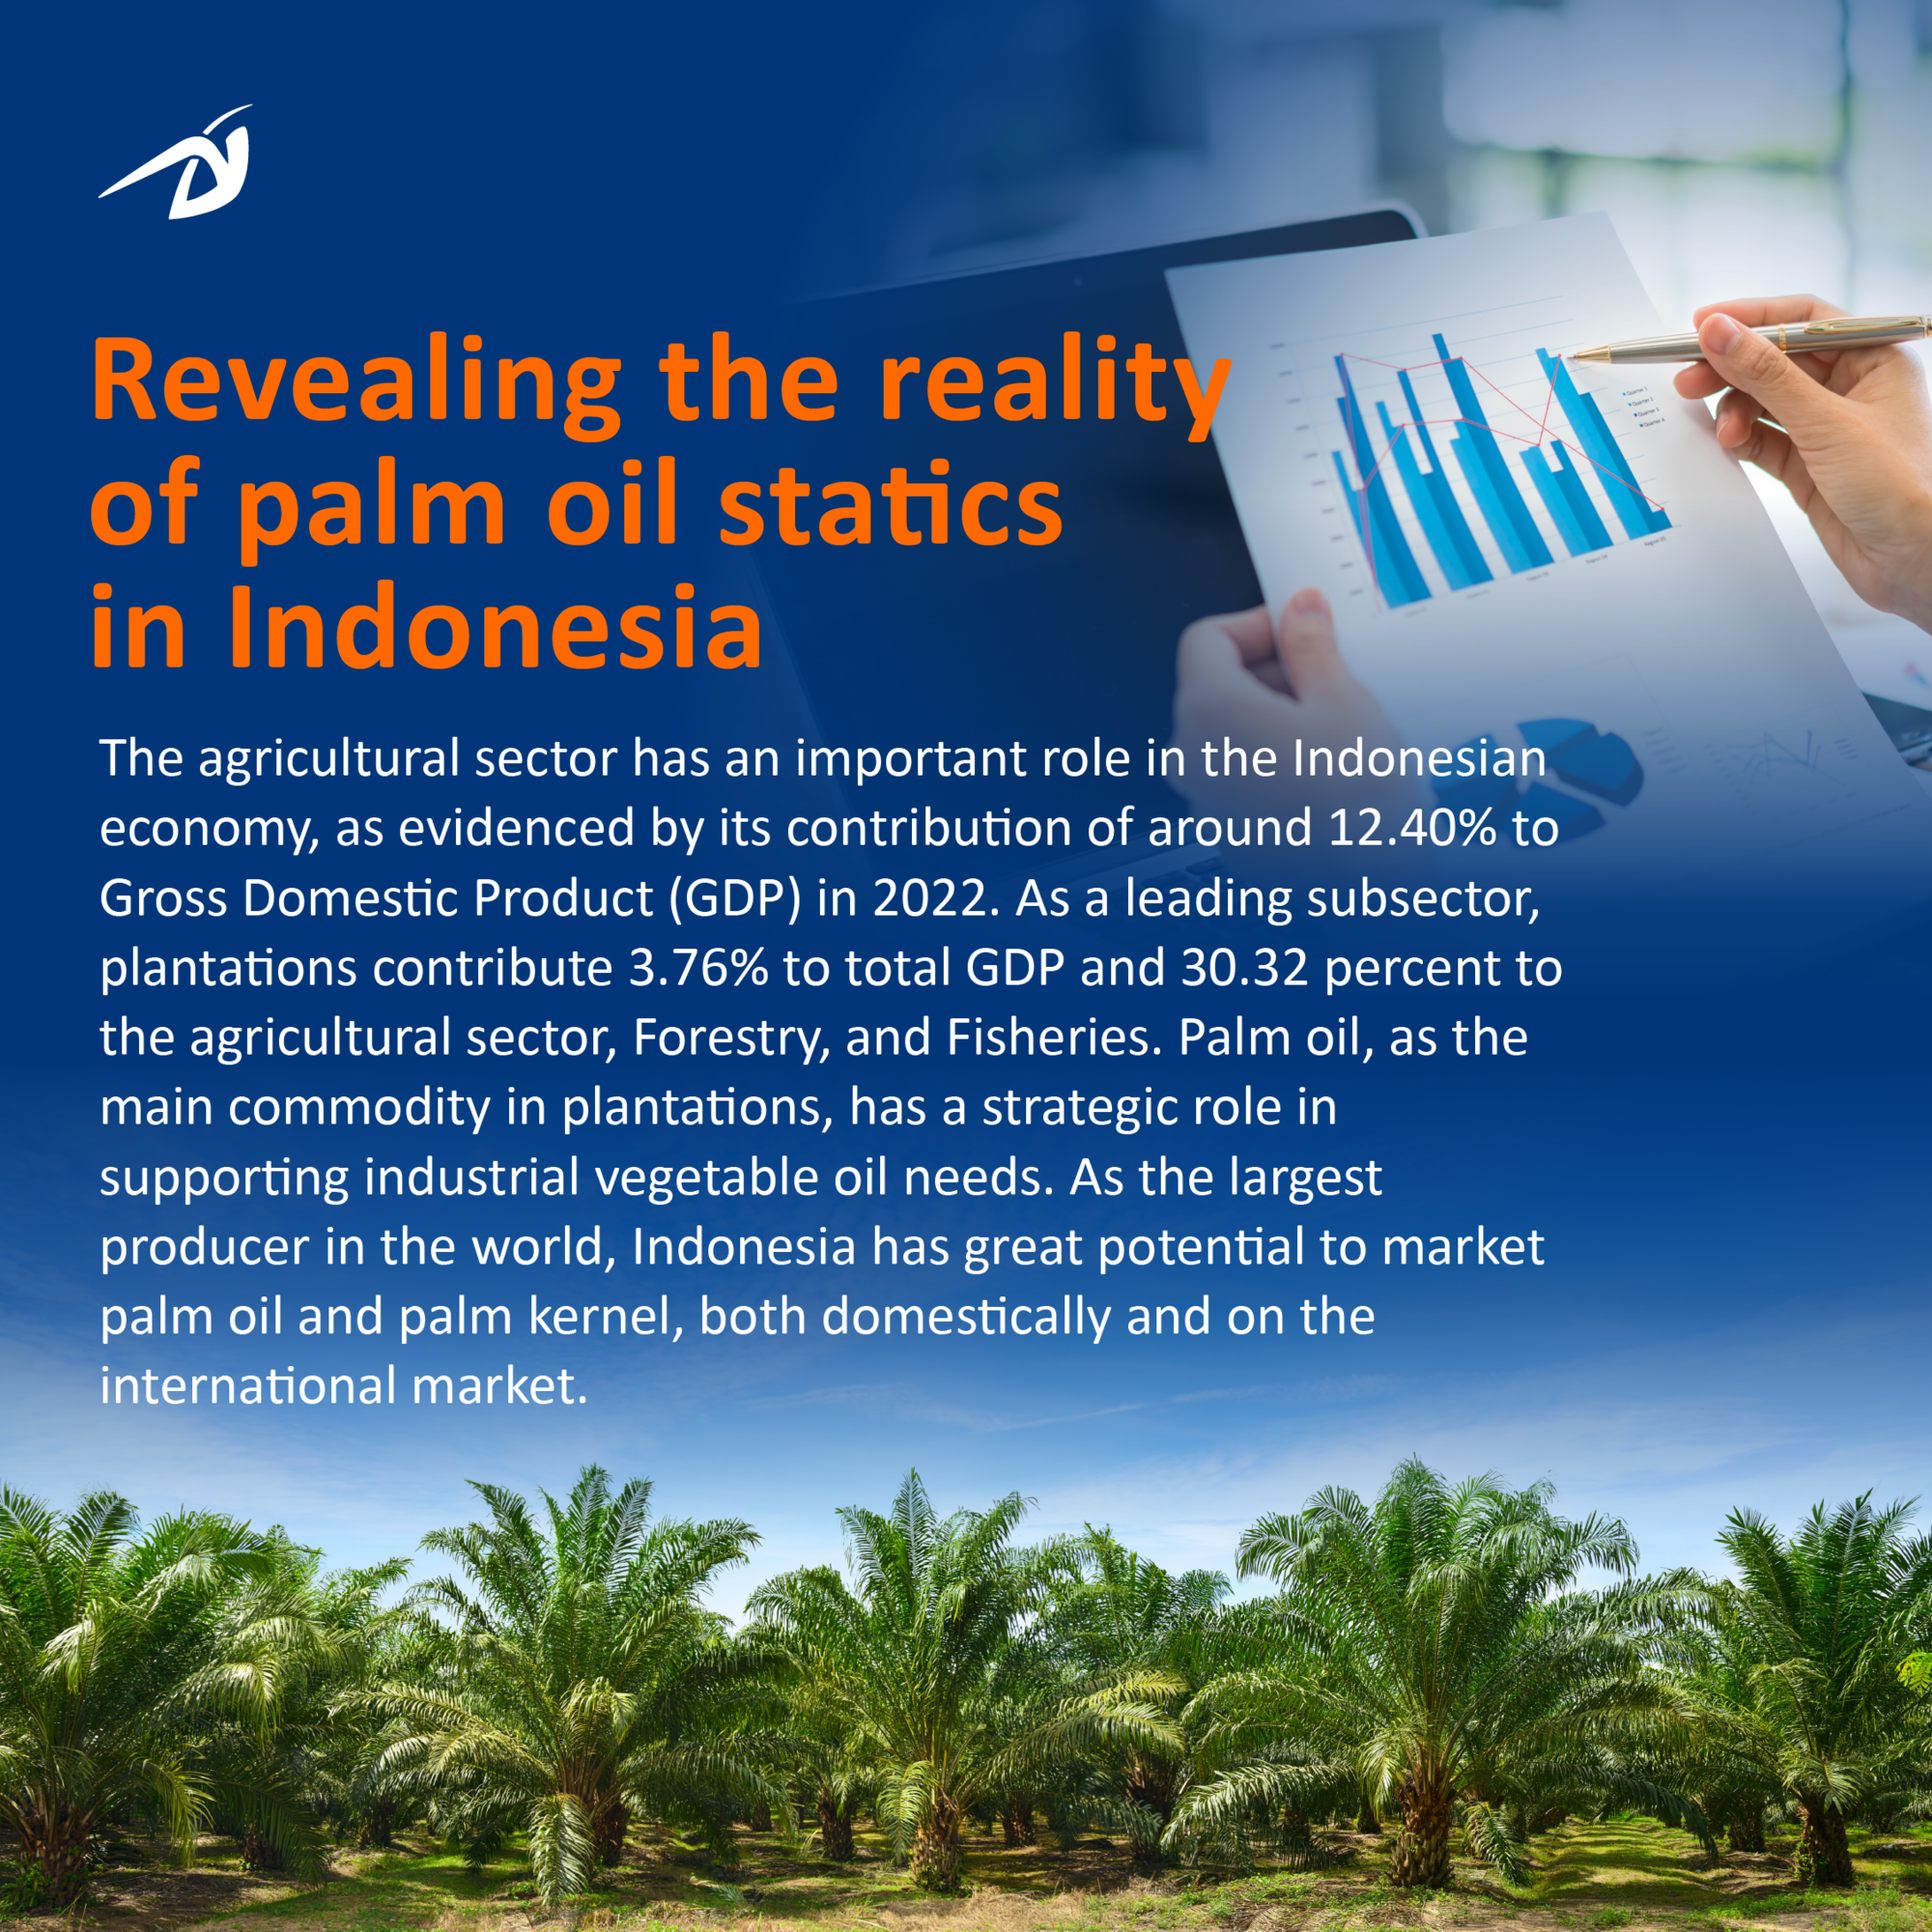 REVEALING THE REALITY OF PALM OIL STATISTICS IN INDONESIA